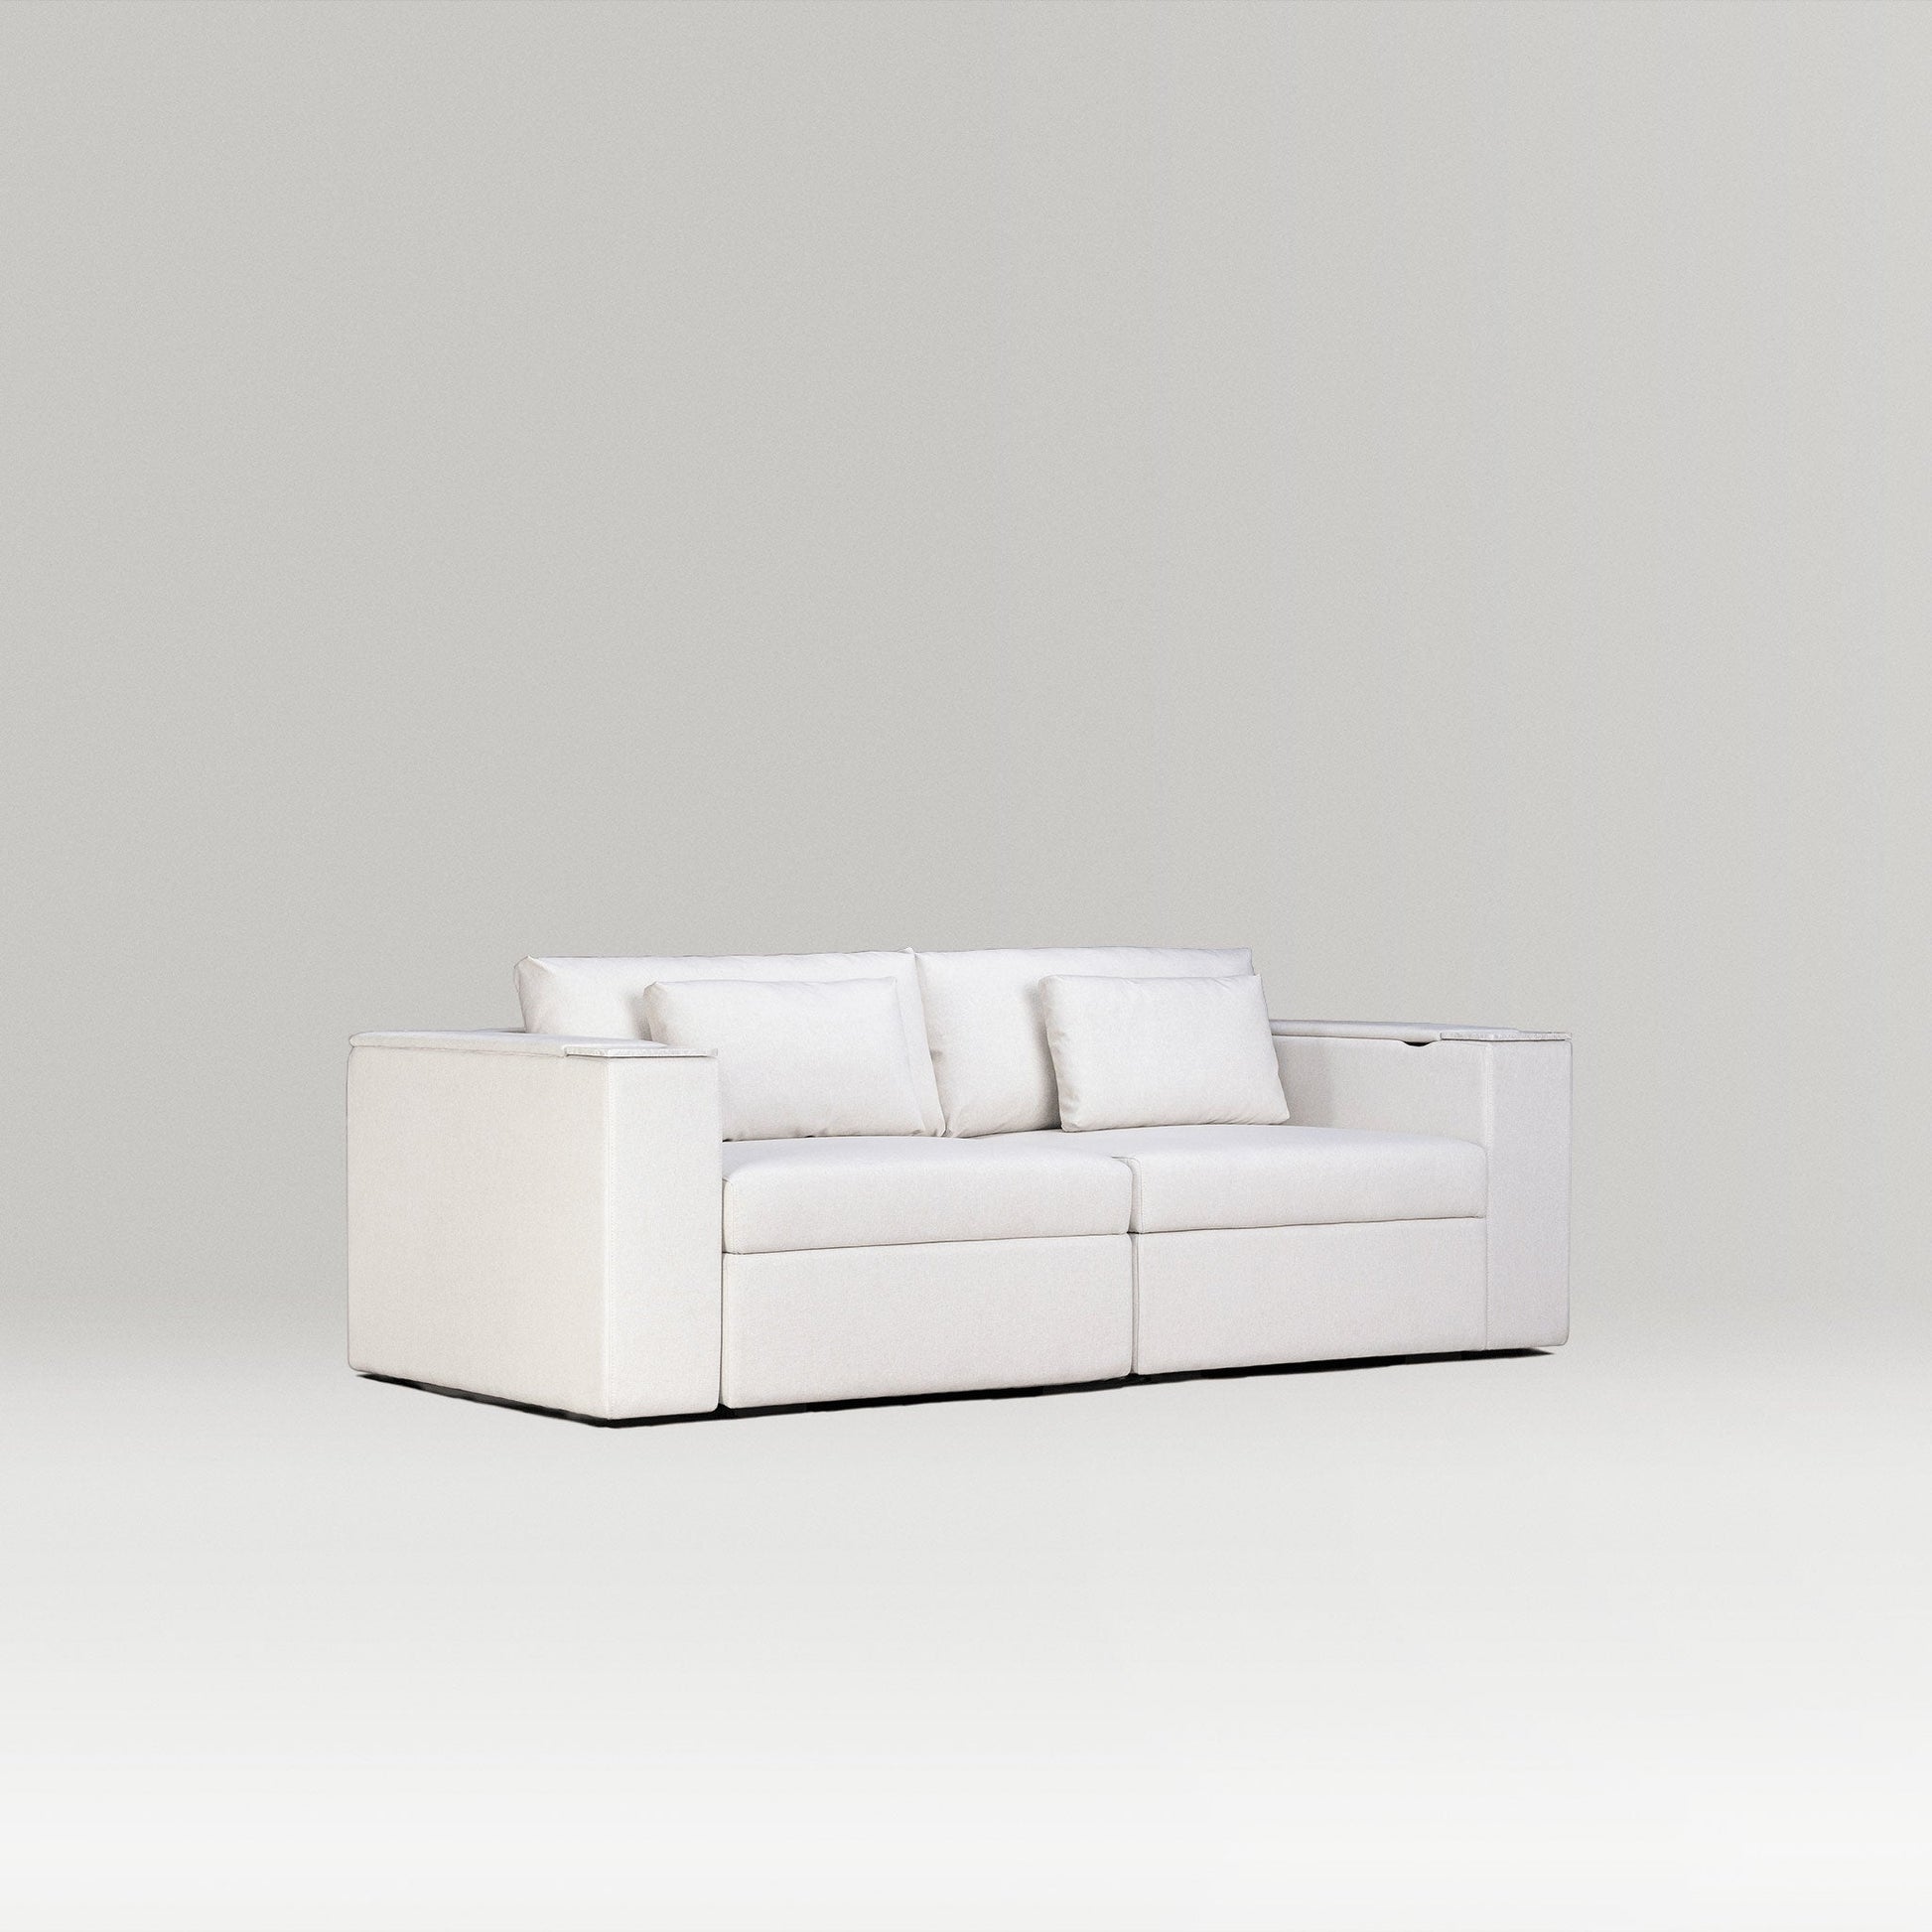 Rezy Design Sofa Store's Two-Seater Sectional Smart Sofa designed to furnish apartments.